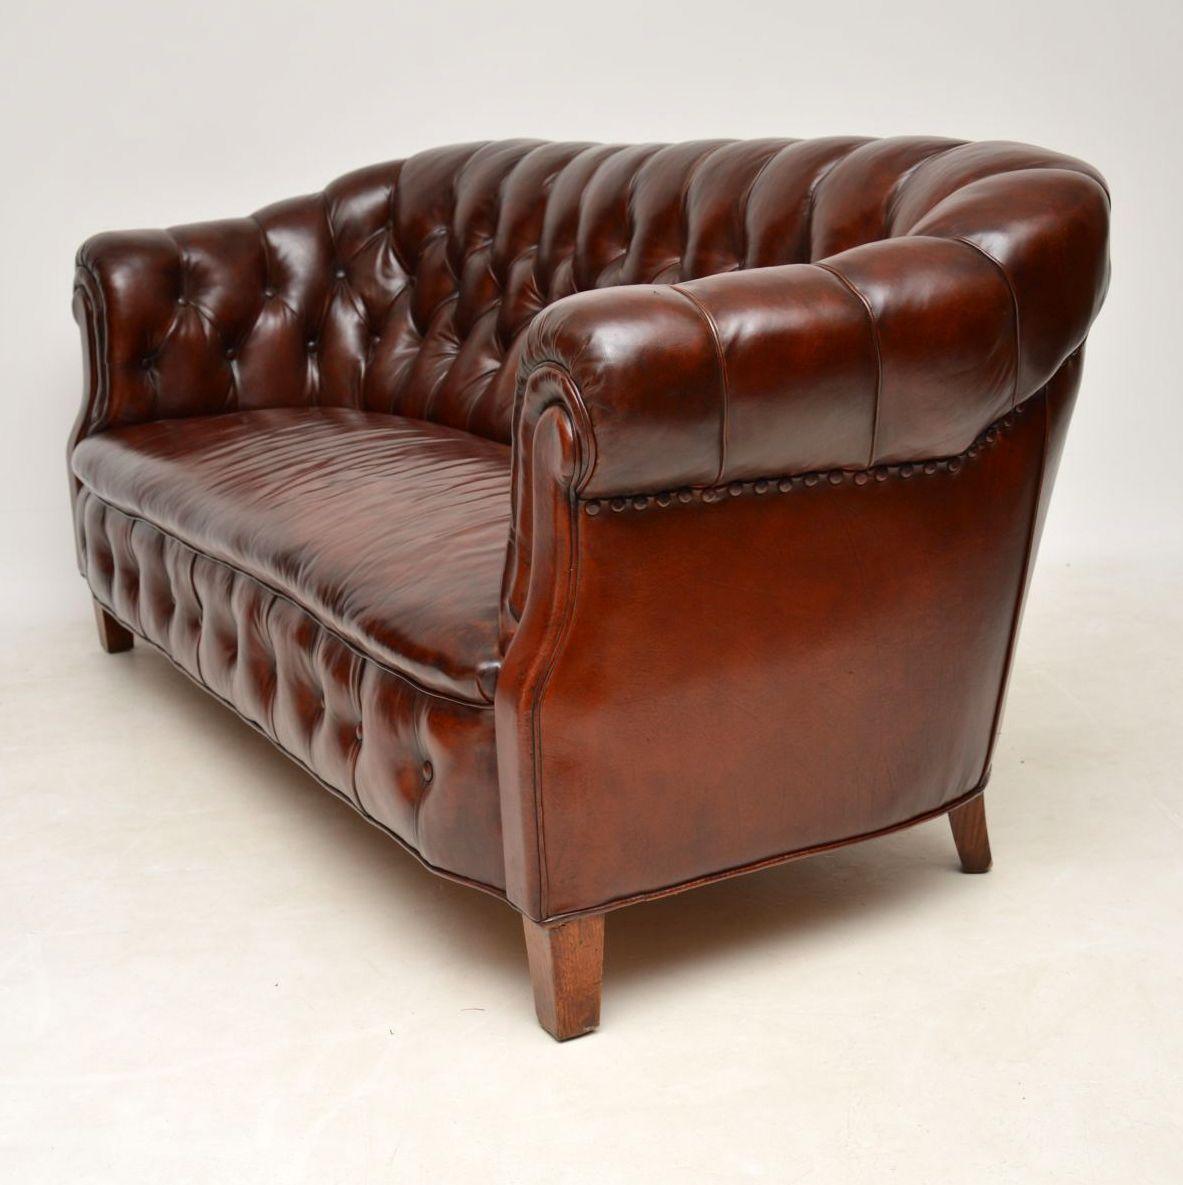 Early 20th Century Antique Deep Buttoned Leather Chesterfield Sofa